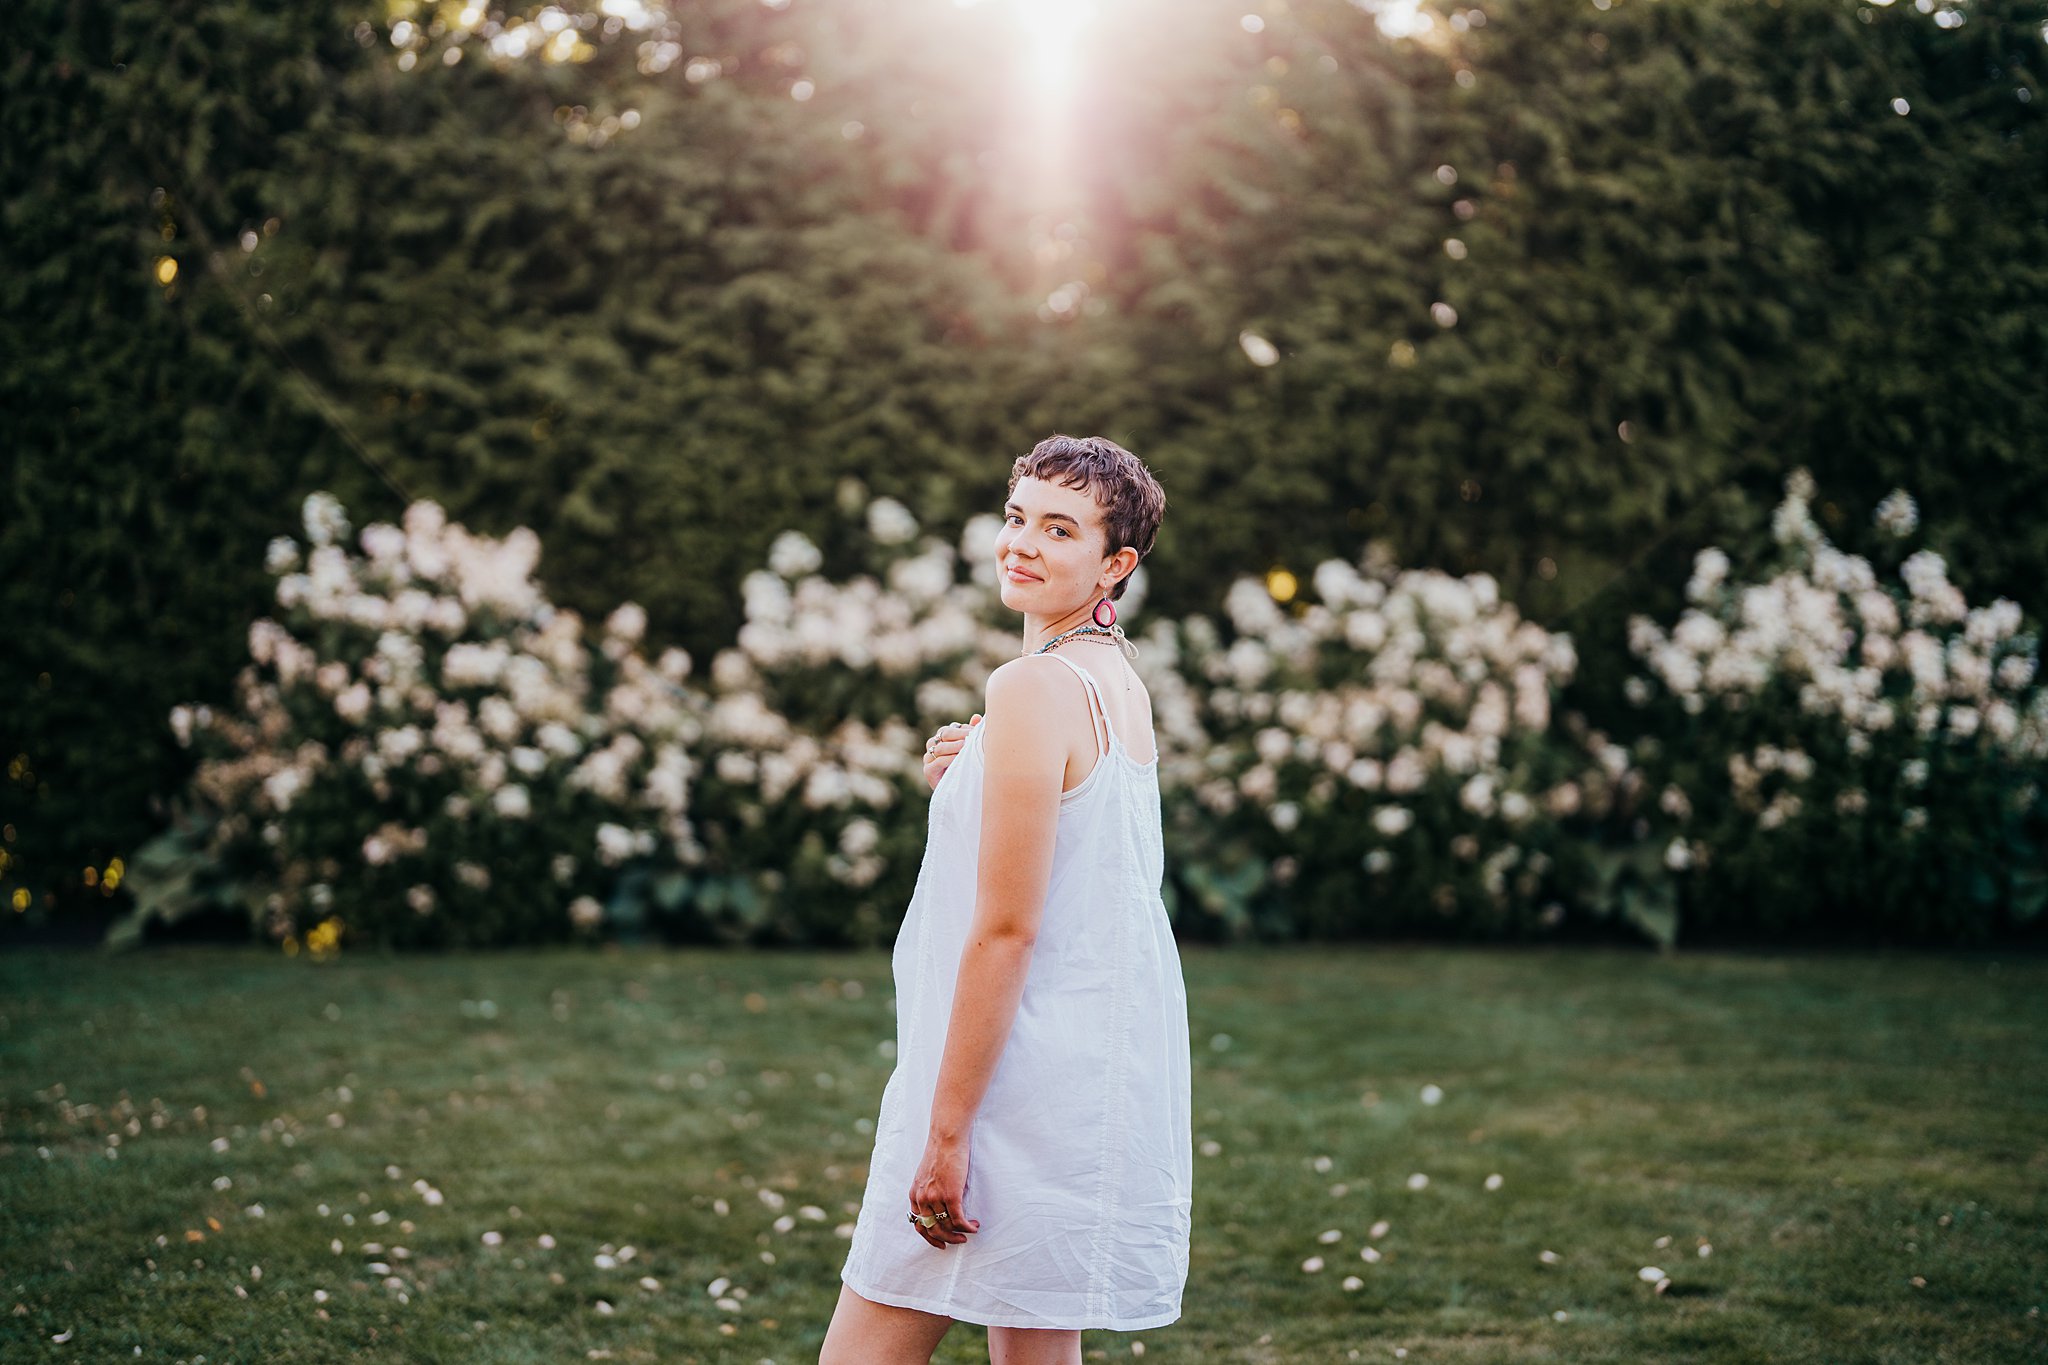 A woman in a white dress looks over her shoulder while walking through a garden of white flowers Seattle Photoshoot Locations